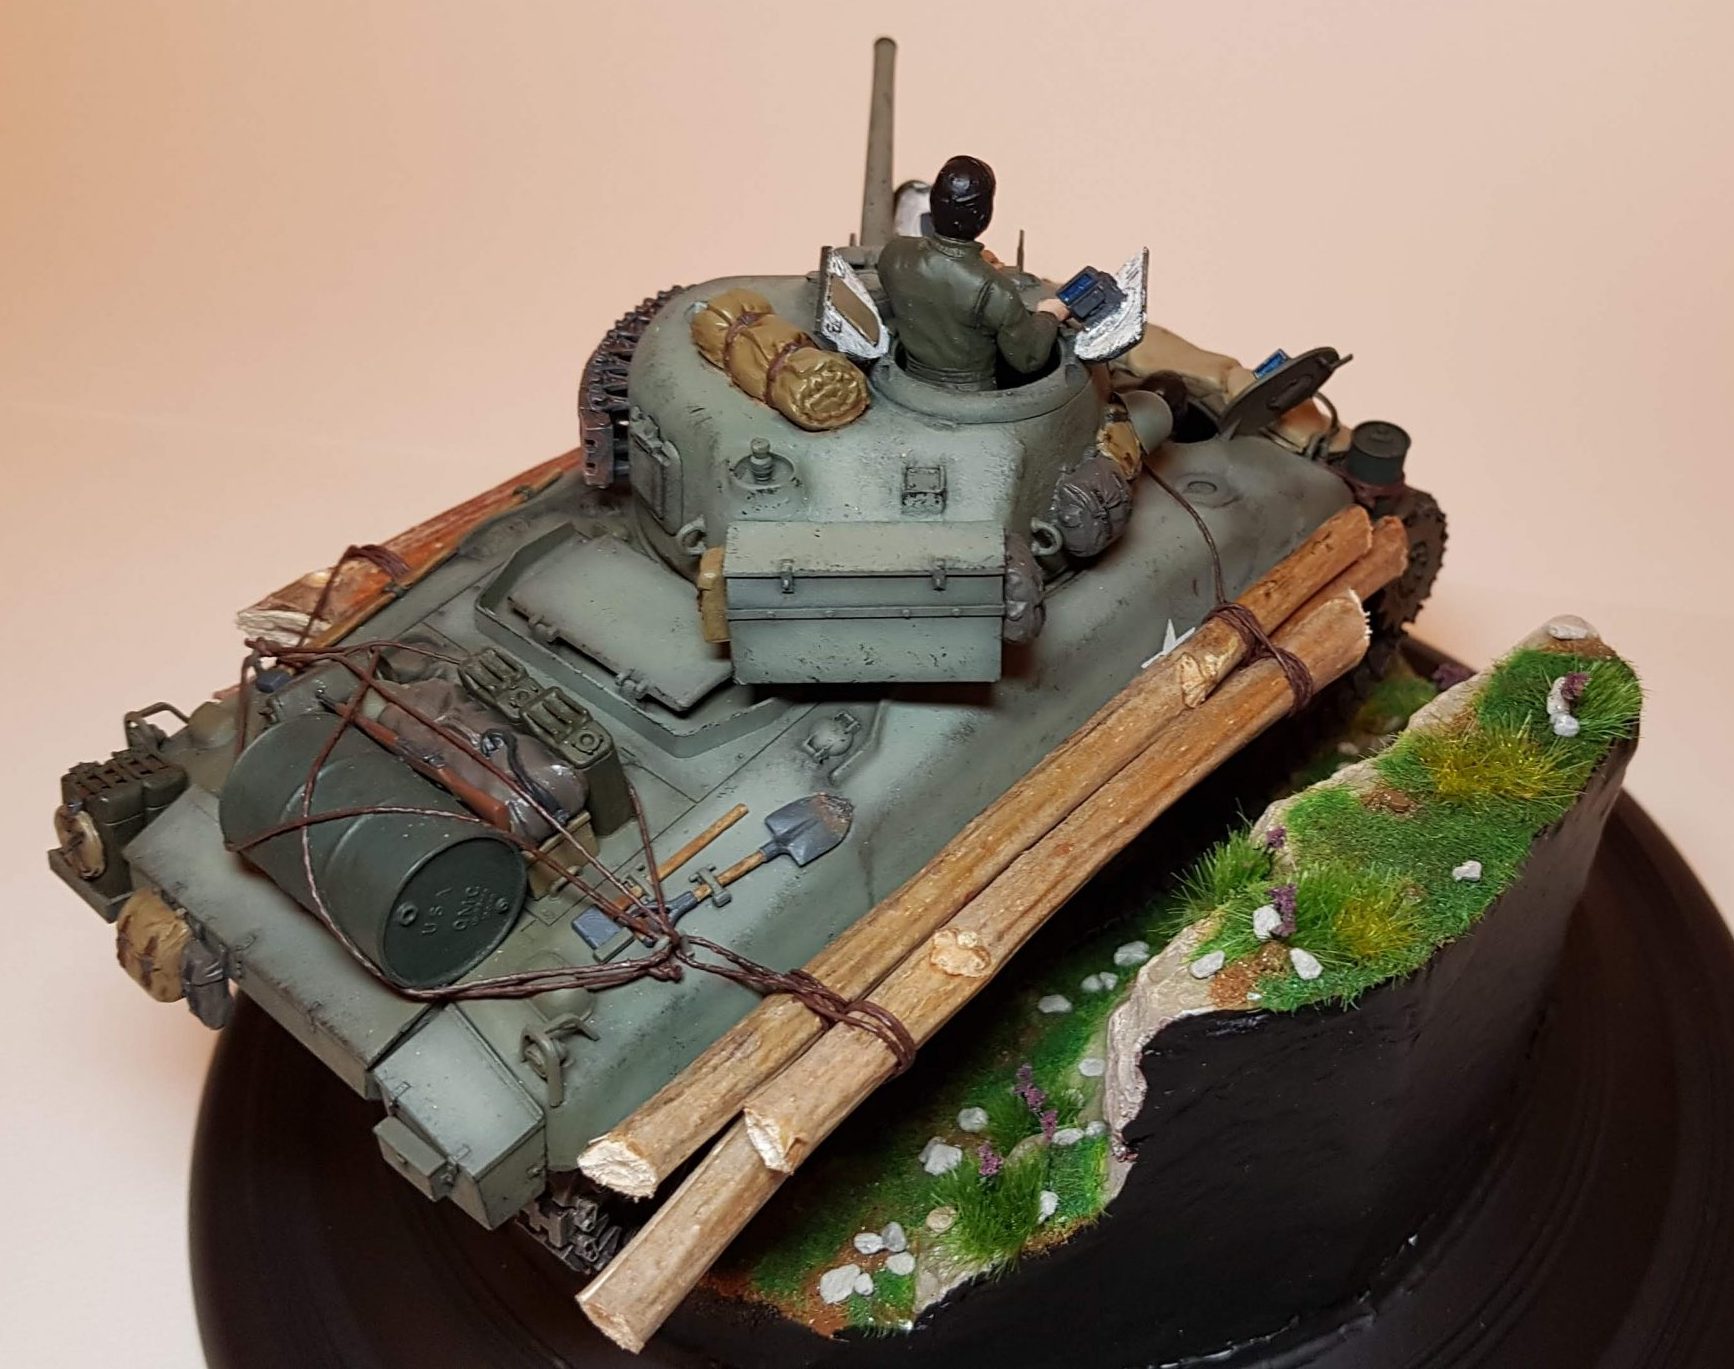 Kit-bashed - M4 Sherman (WW2) - Rear Angle View 2 - 1/35 Scale - Built By Wright Built - Tamiya, Italeri, Formations, Others, Sculpted